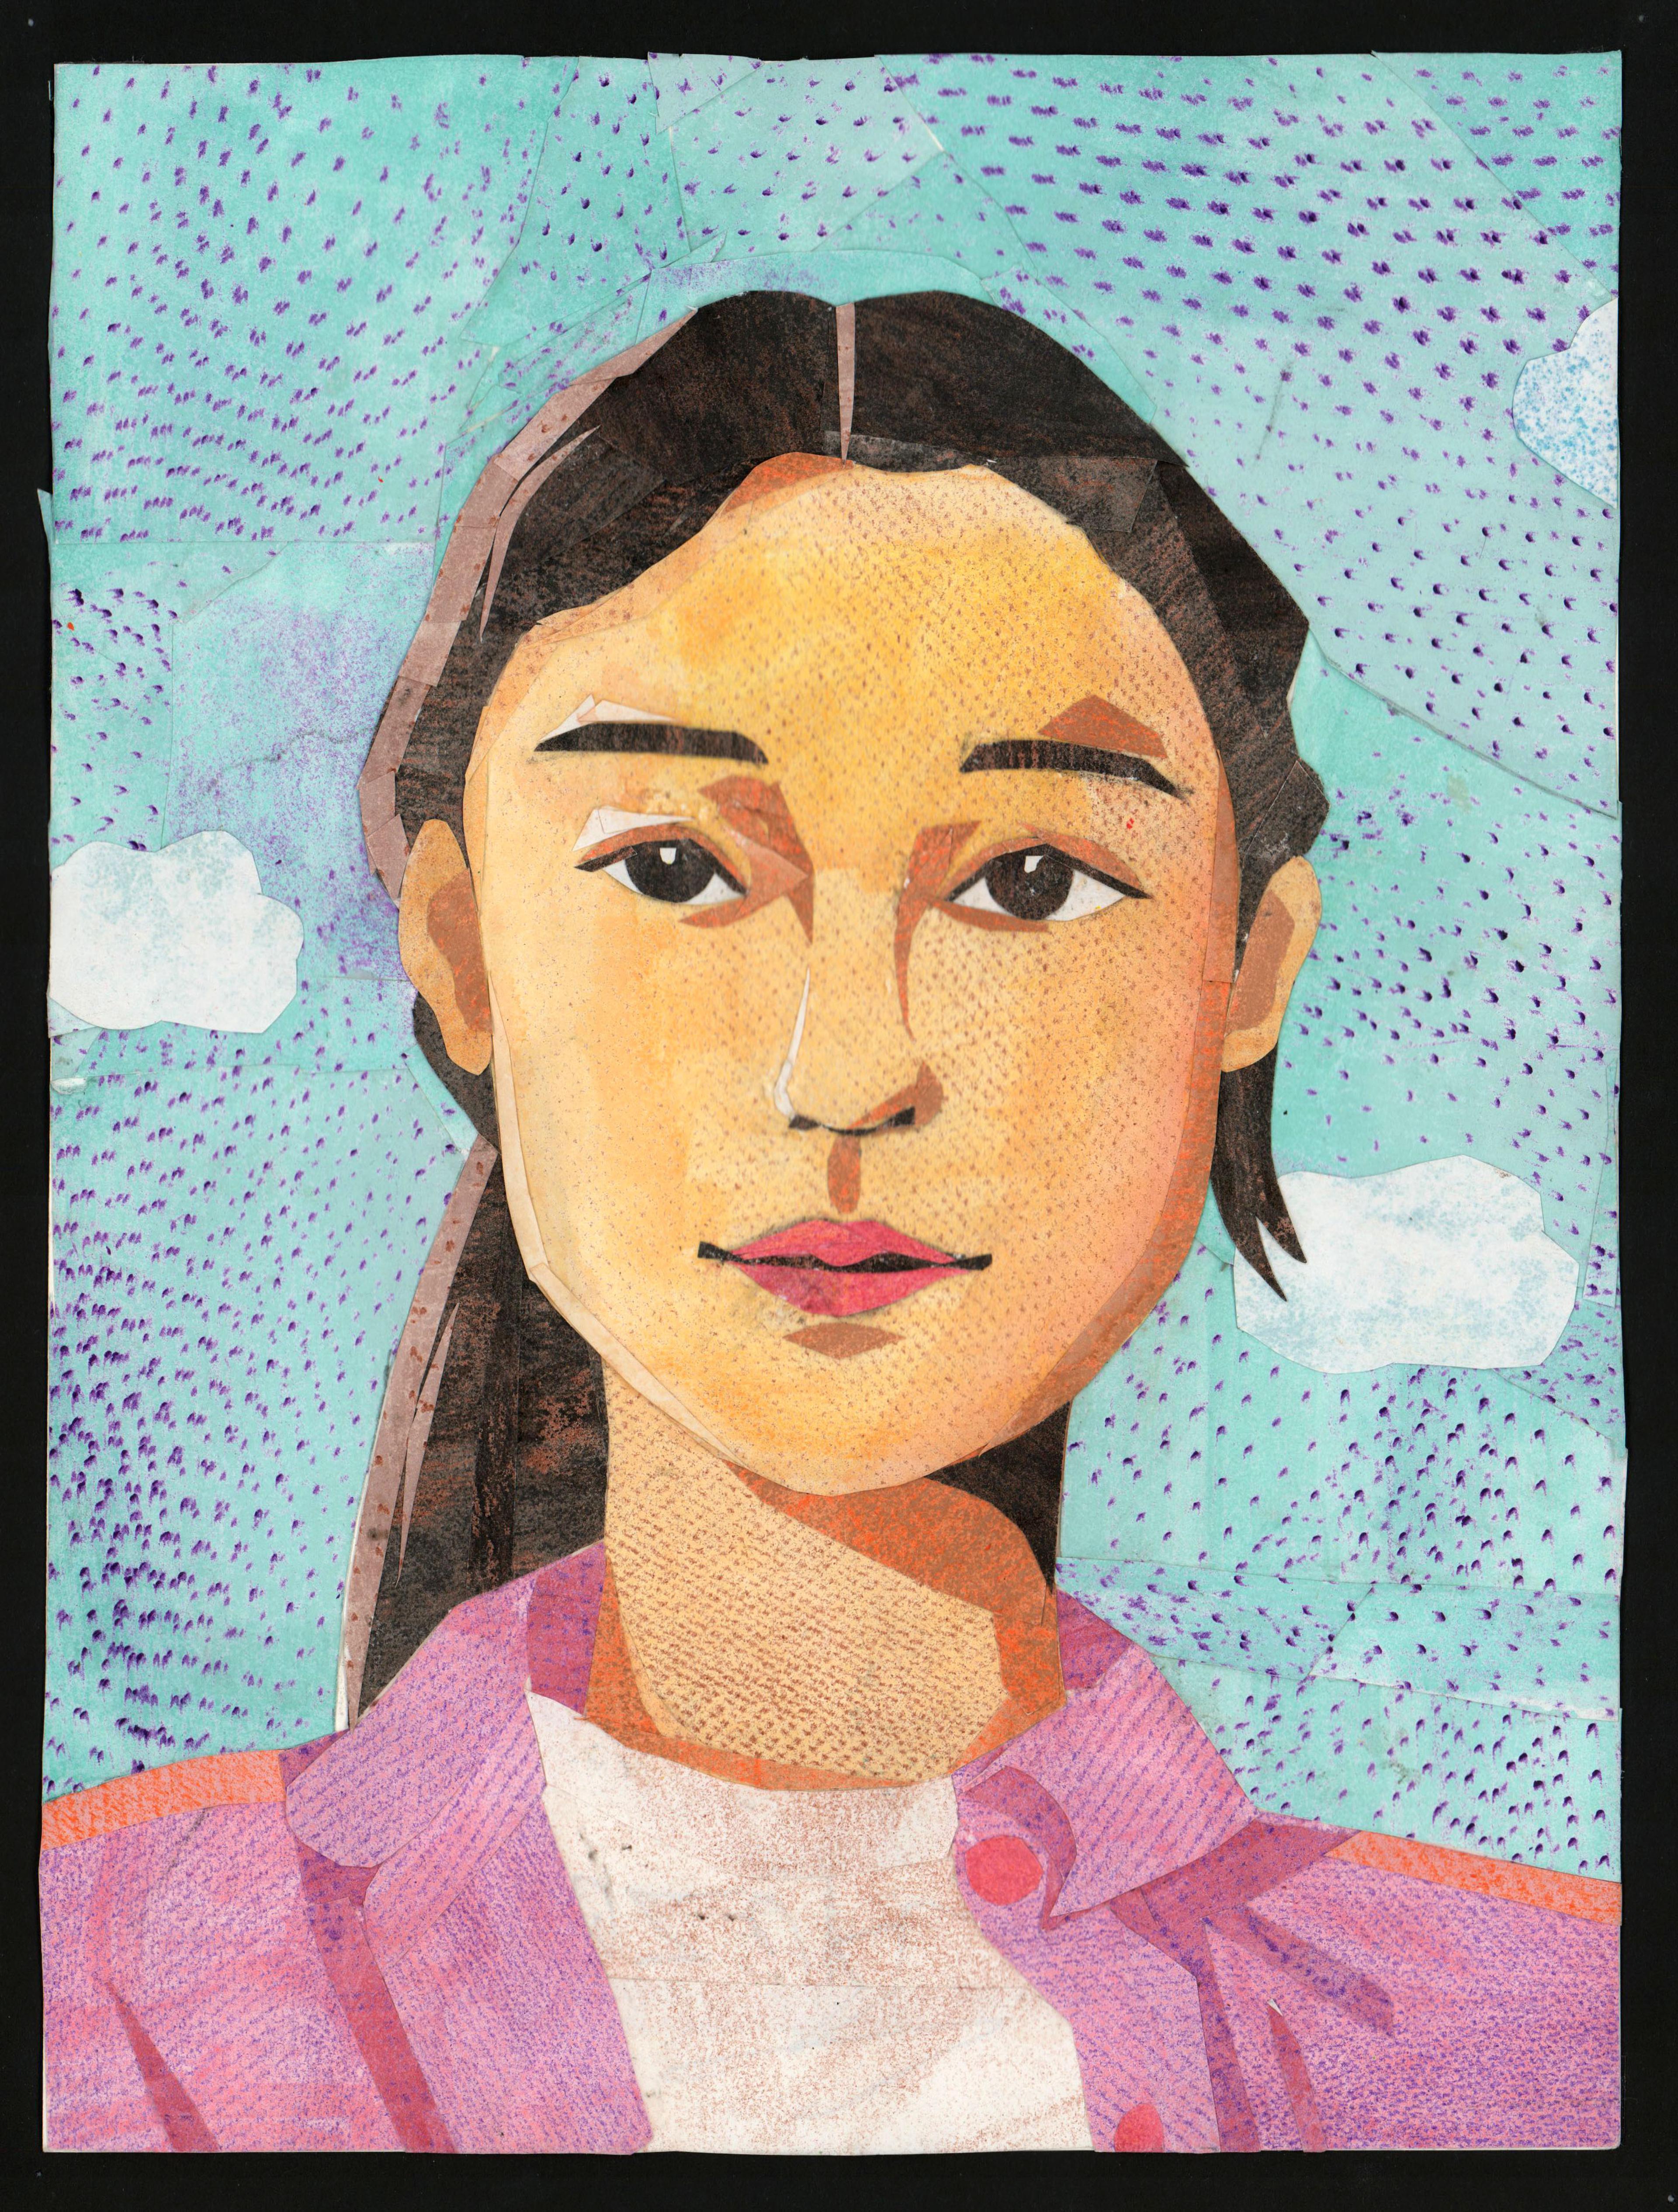 Mixed-media-collage self-portrait of an adolescent Asian girl with dark eyes and long dark hair tied behind her head, facing the viewer and wearing a pink collared shirt over a white T-shirt. The girl is faintly smiling. The background is a teal sky with a pair of small white clouds and covered in tiny  purple dots that resemble a halftone pattern.